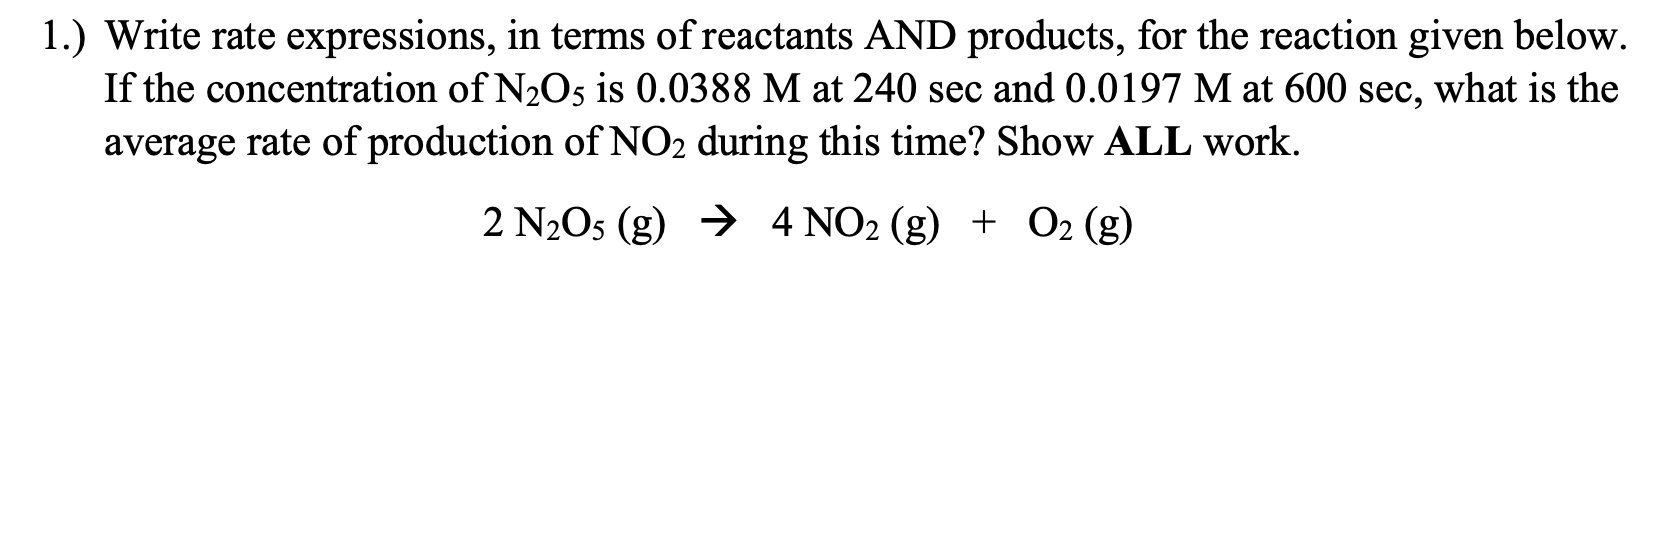 1.) Write rate expressions, in terms of reactants AND products, for the reaction given below.
If the concentration of N2O5 is 0.0388 M at 240 sec and 0.0197 M at 600 sec, what is the
average rate of production of NO2 during this time? Show ALL work.
2 N2O5 (g) → 4 NO2 (g) + 02 (g)
